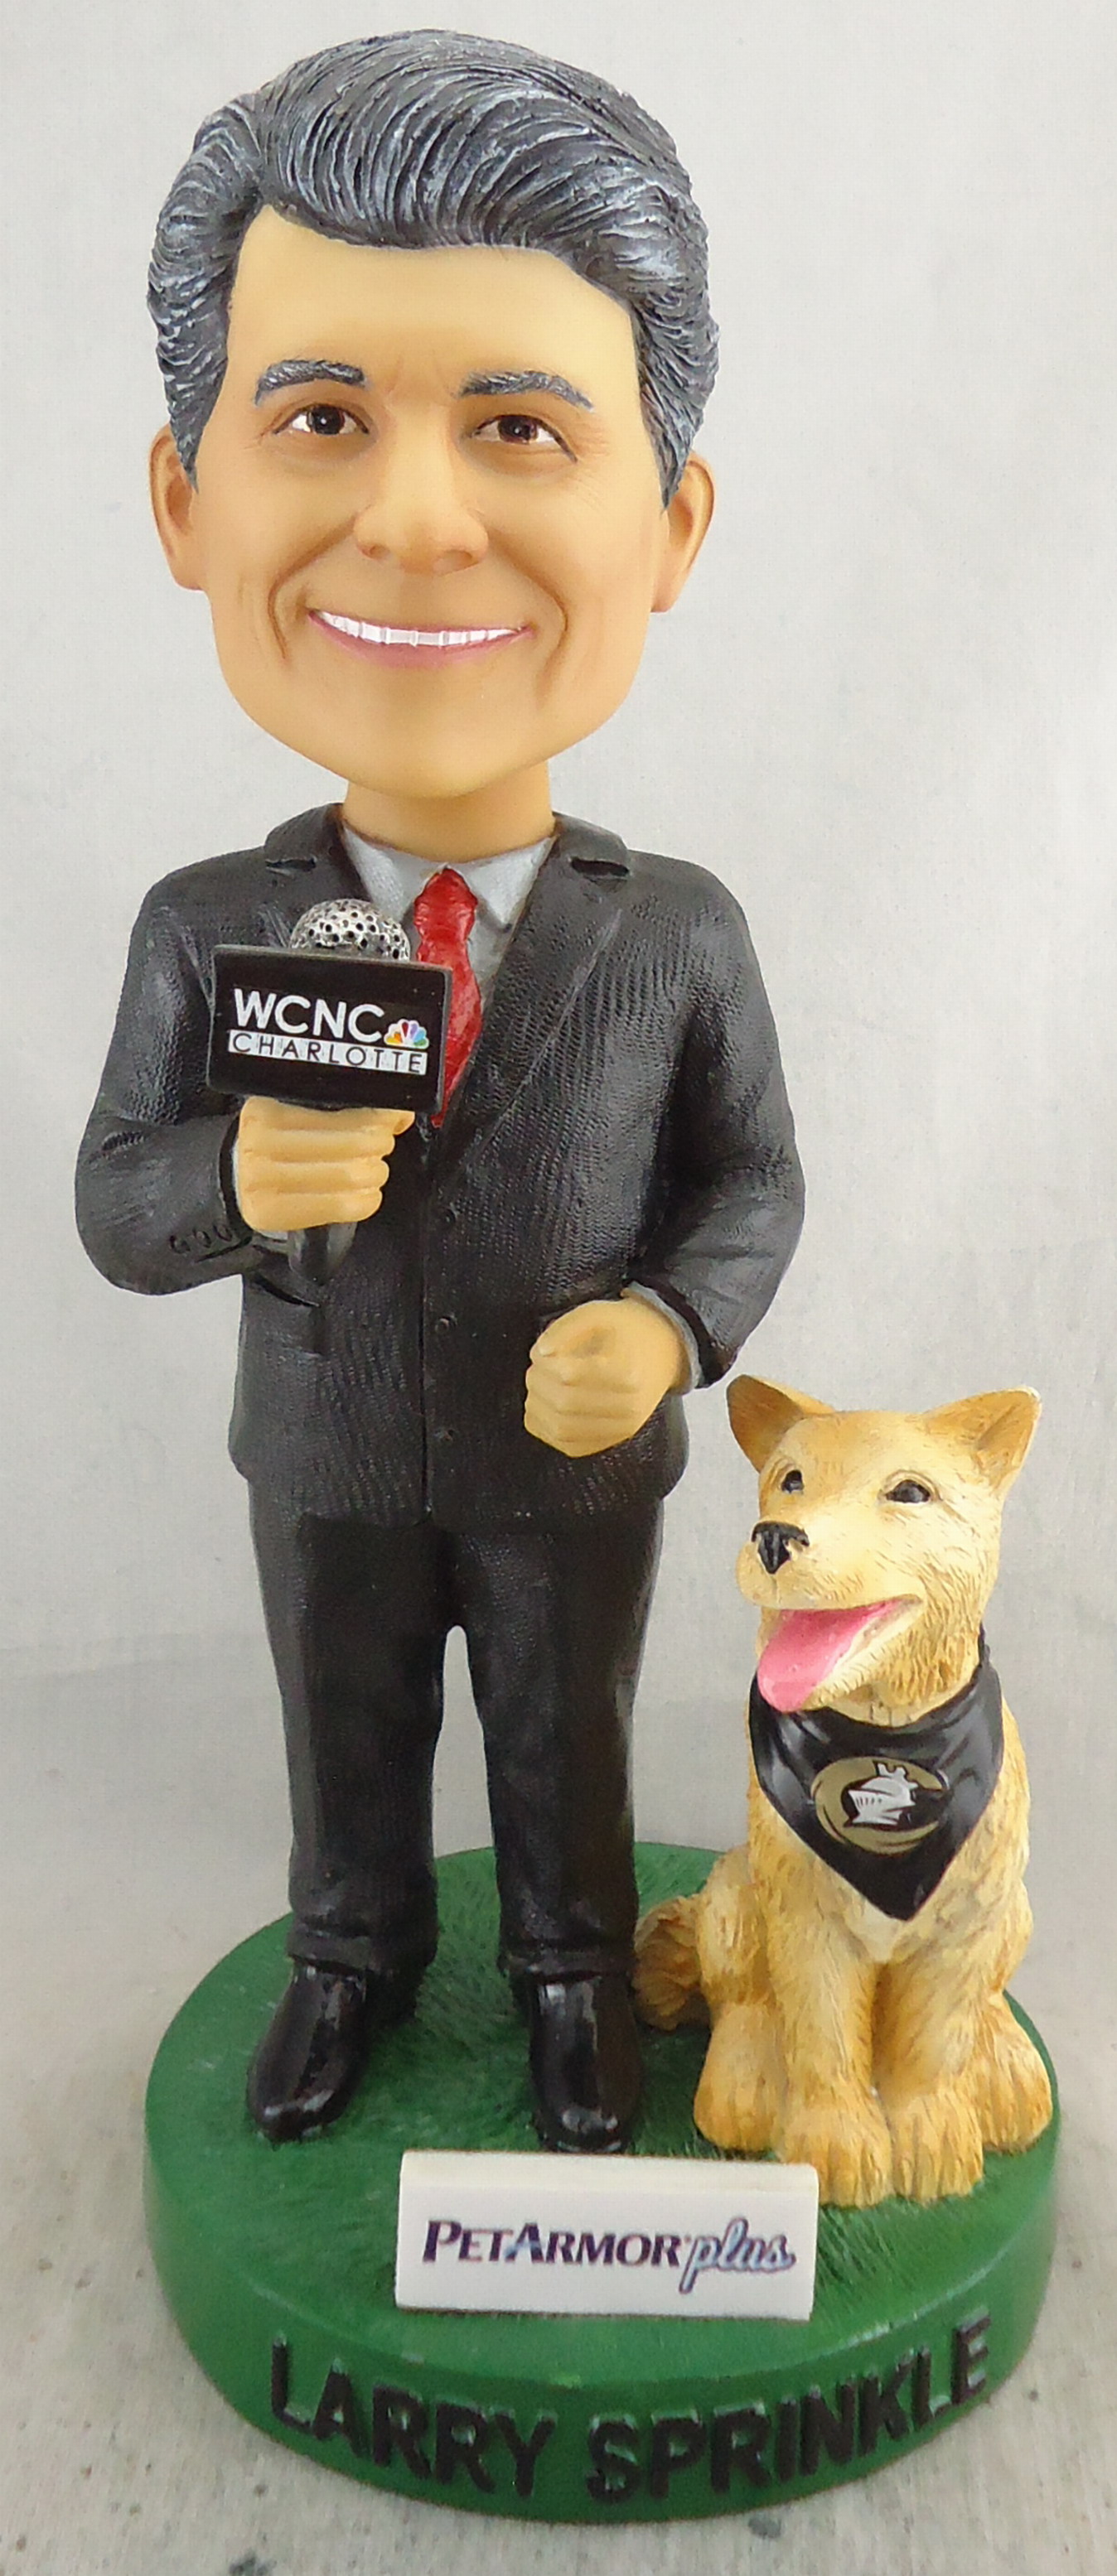 Charlotte Knights - Larry Sprinkle with Dog 112050, 7inch Bobblehead.jpg